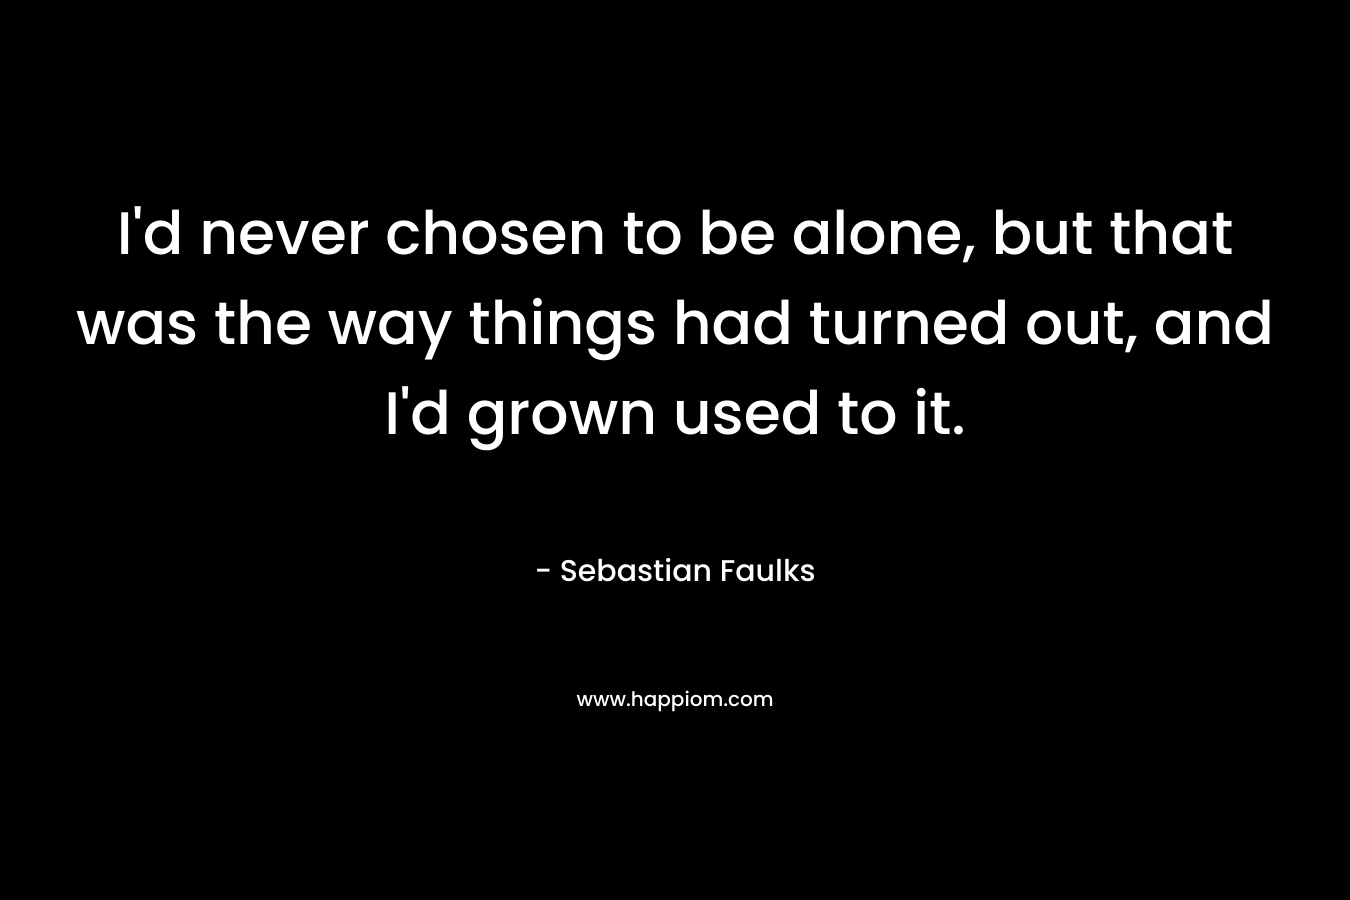 I’d never chosen to be alone, but that was the way things had turned out, and I’d grown used to it. – Sebastian Faulks